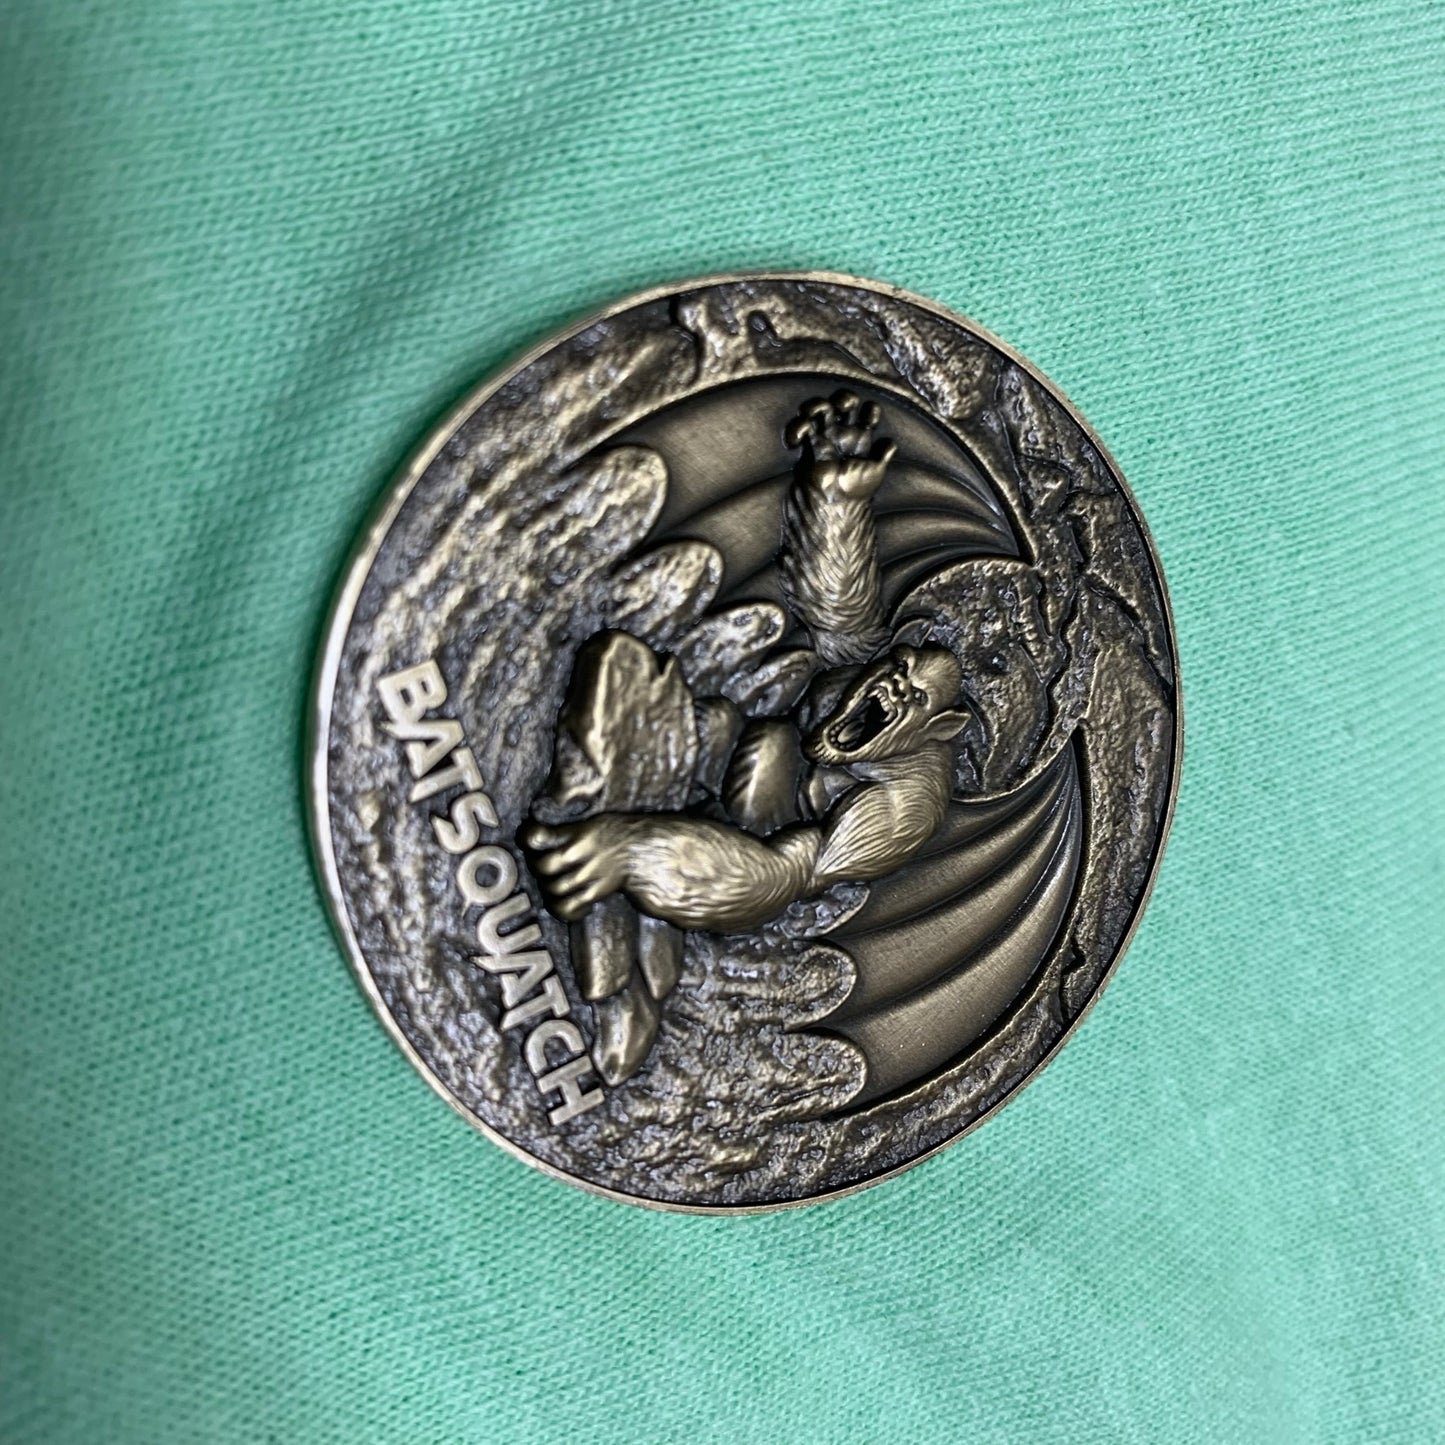 Collectible Cryptozoology Challenge Coin